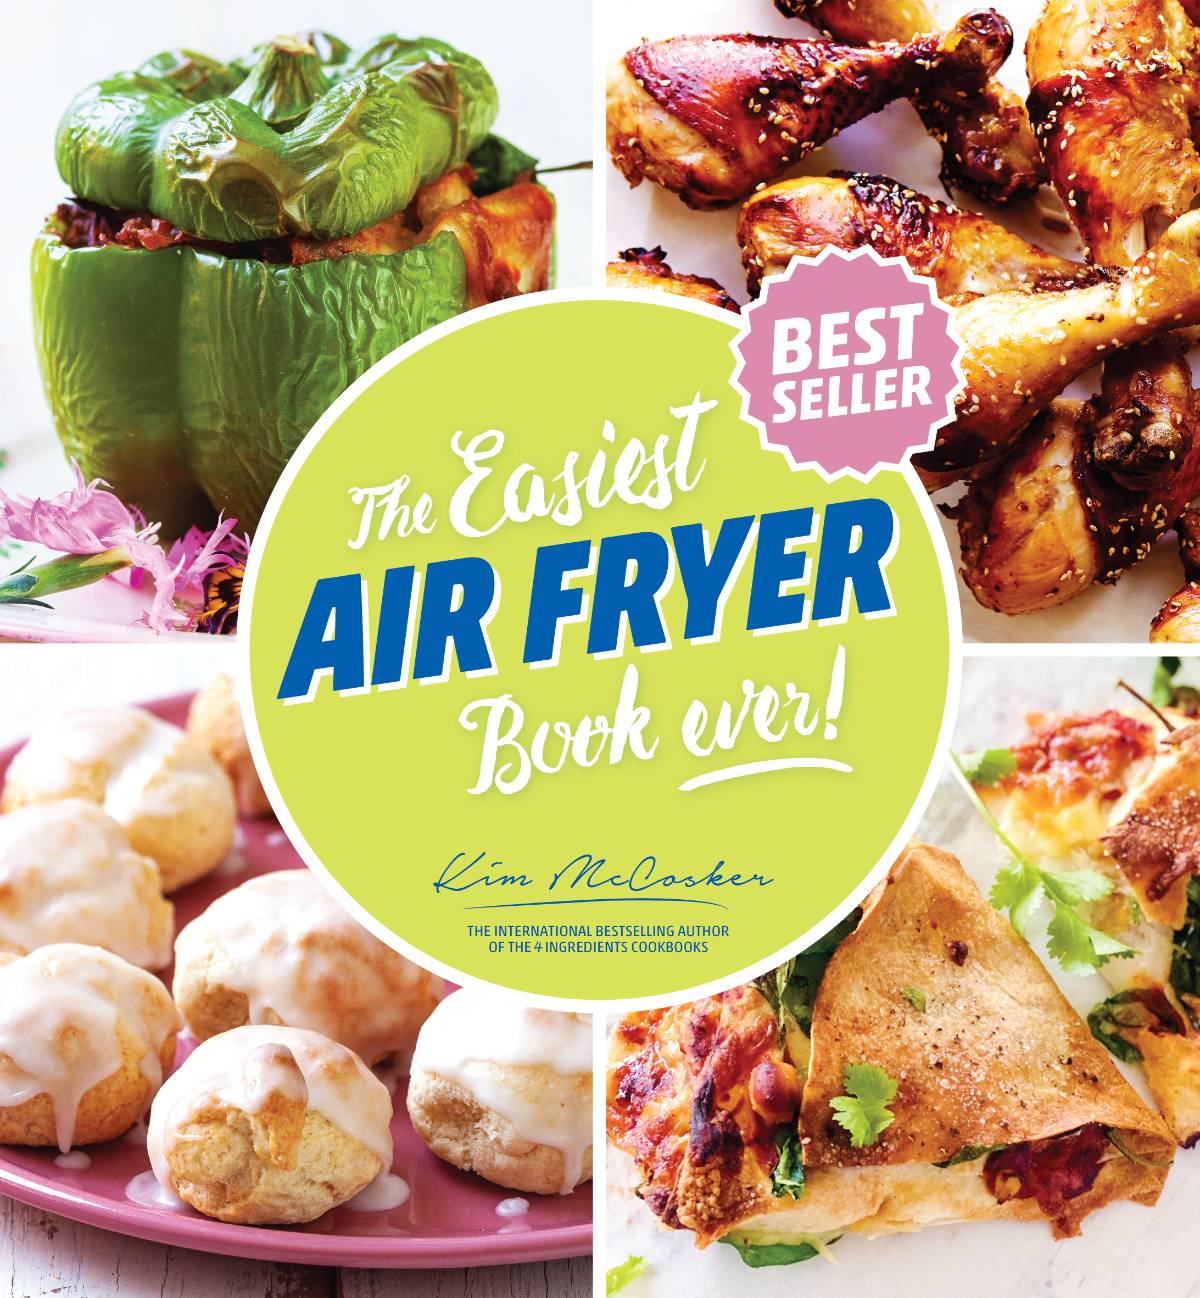 The Easiest Air Fryer Book ever